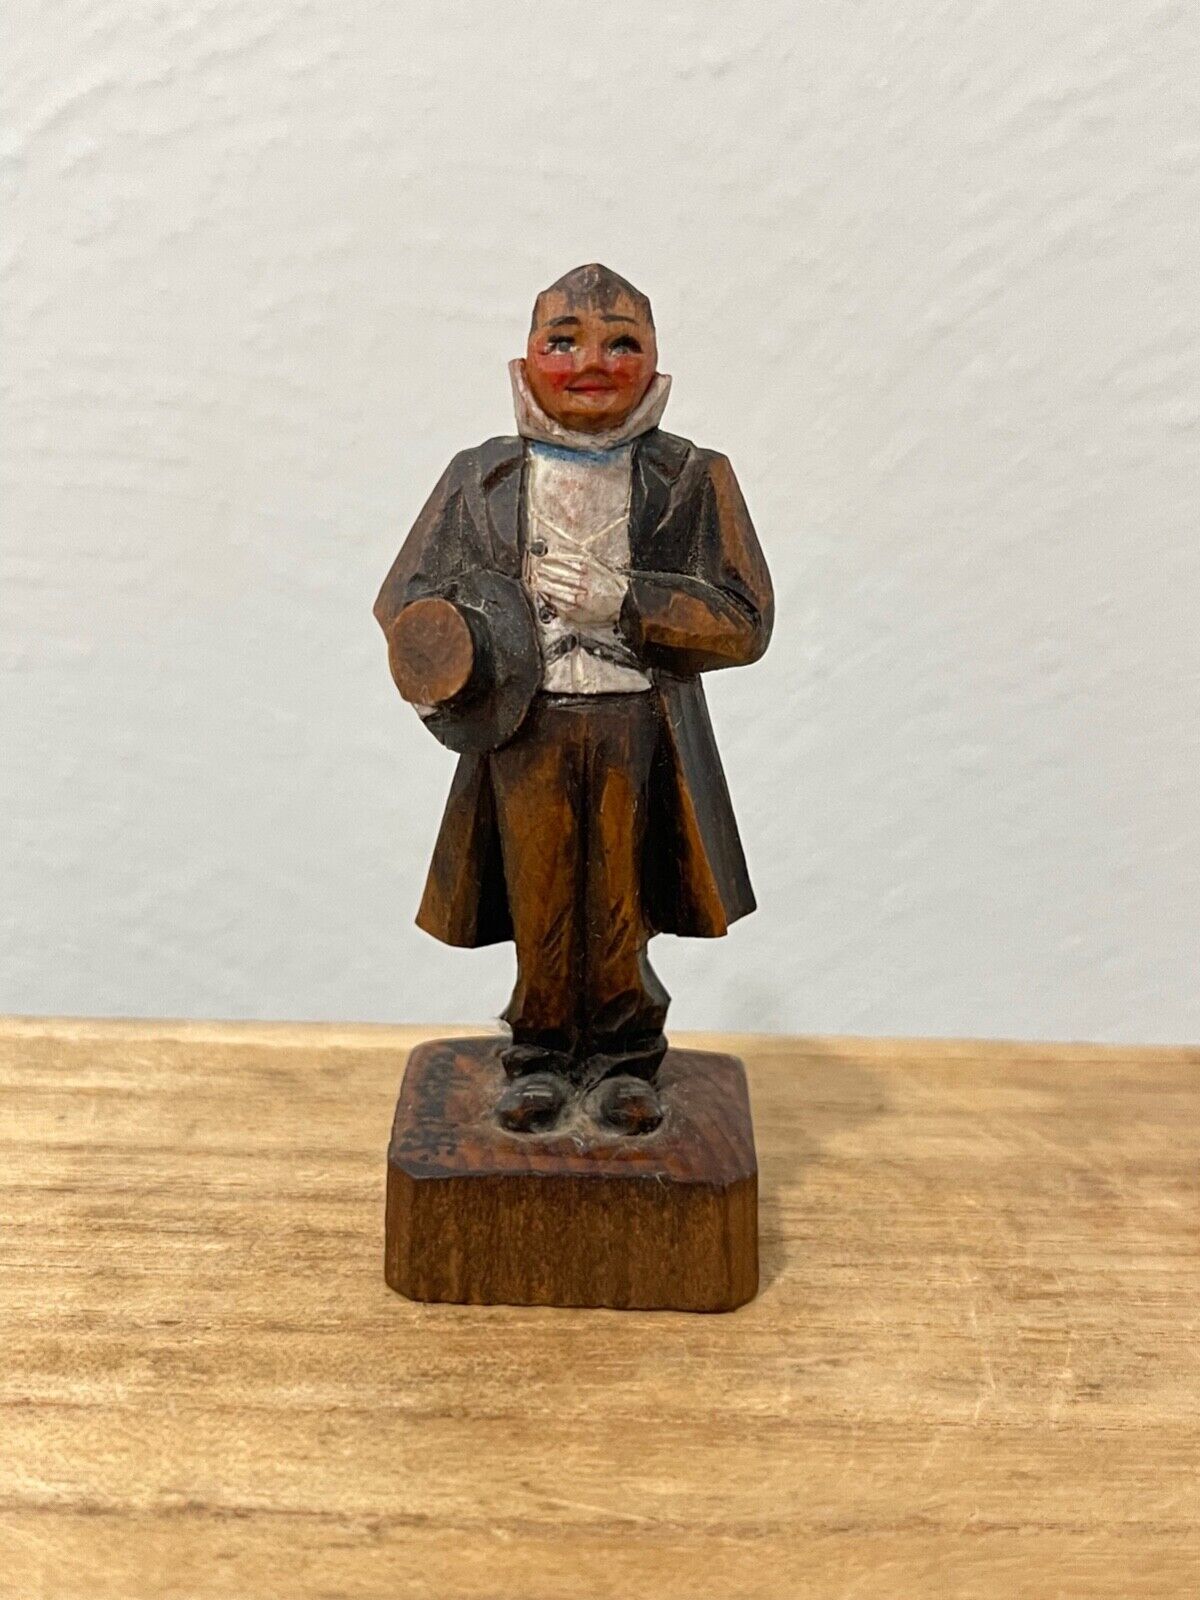 Vtg Anri Wood Carved Figurine Mr. Pecksniff of Charles Dickens Martin Chuzzlewit